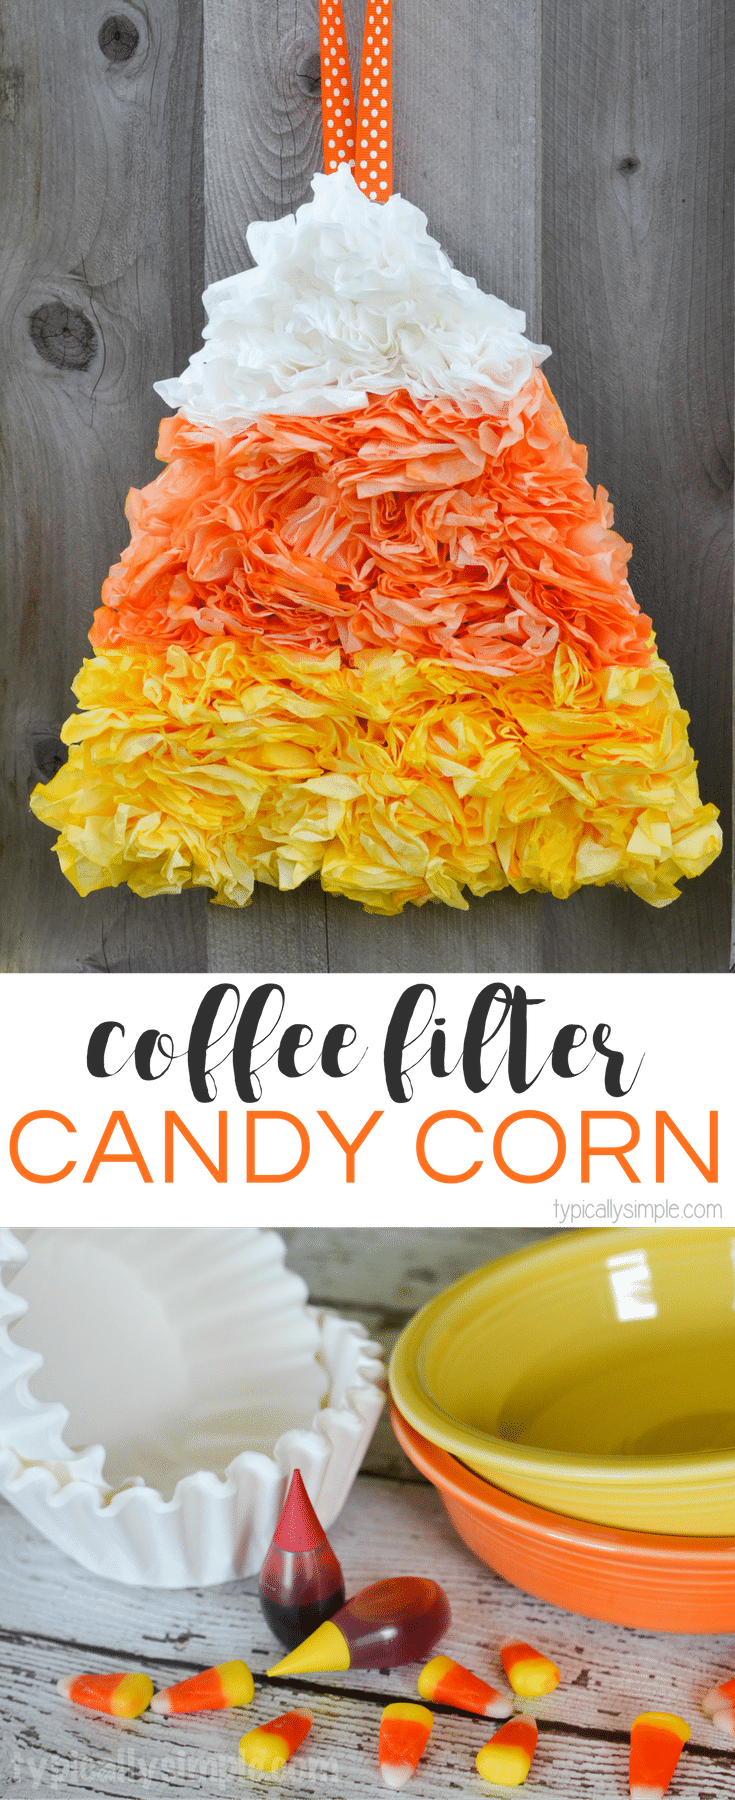 Using dyed coffee filters, this candy corn project makes a fun door hanging for Halloween!